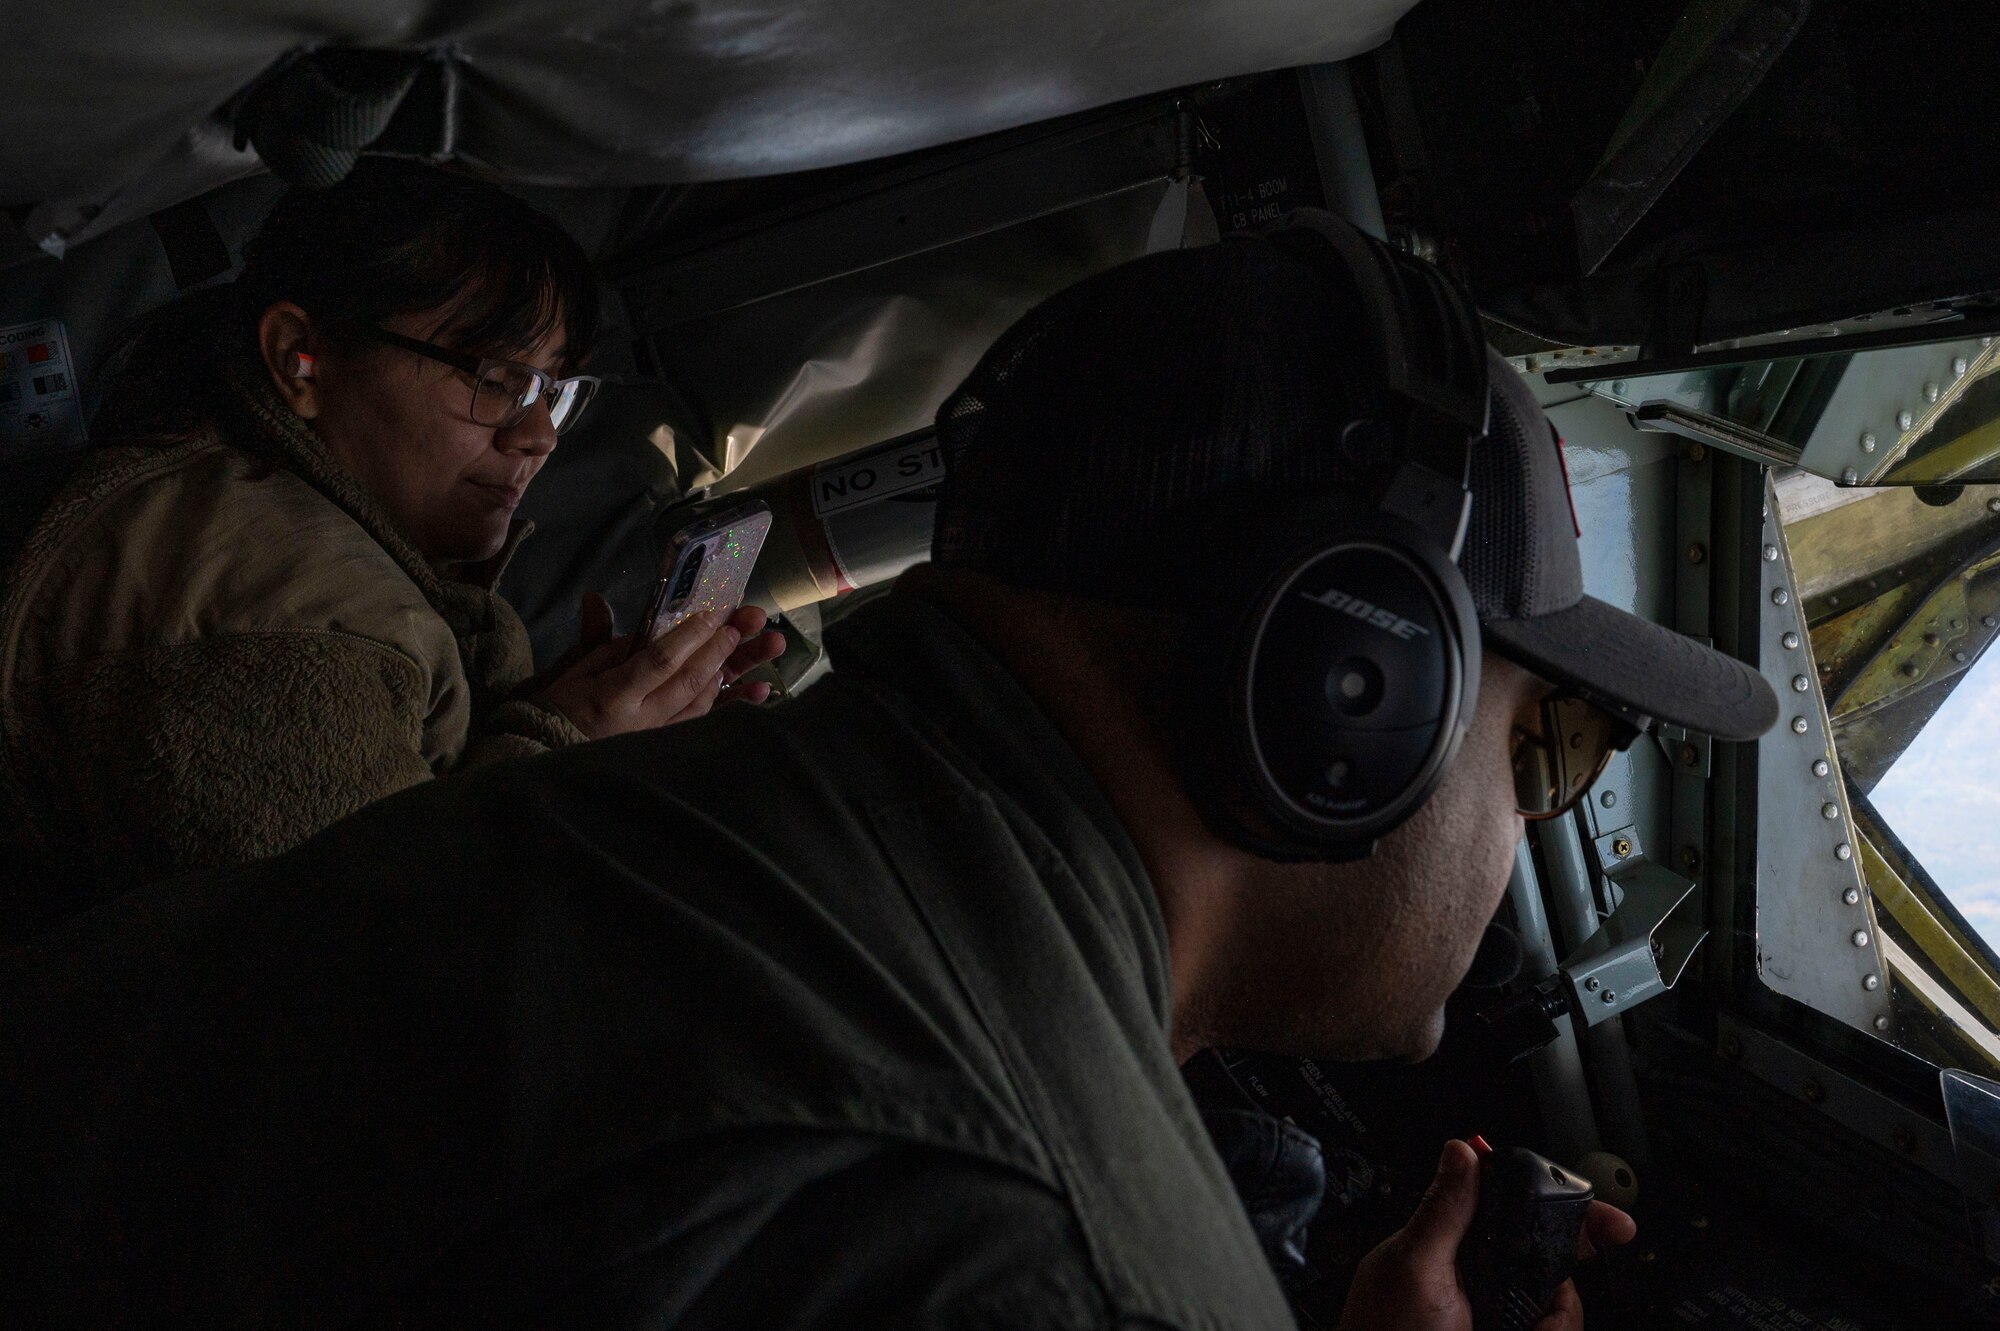 An Airman photographs aerial refueling on her cell phone.